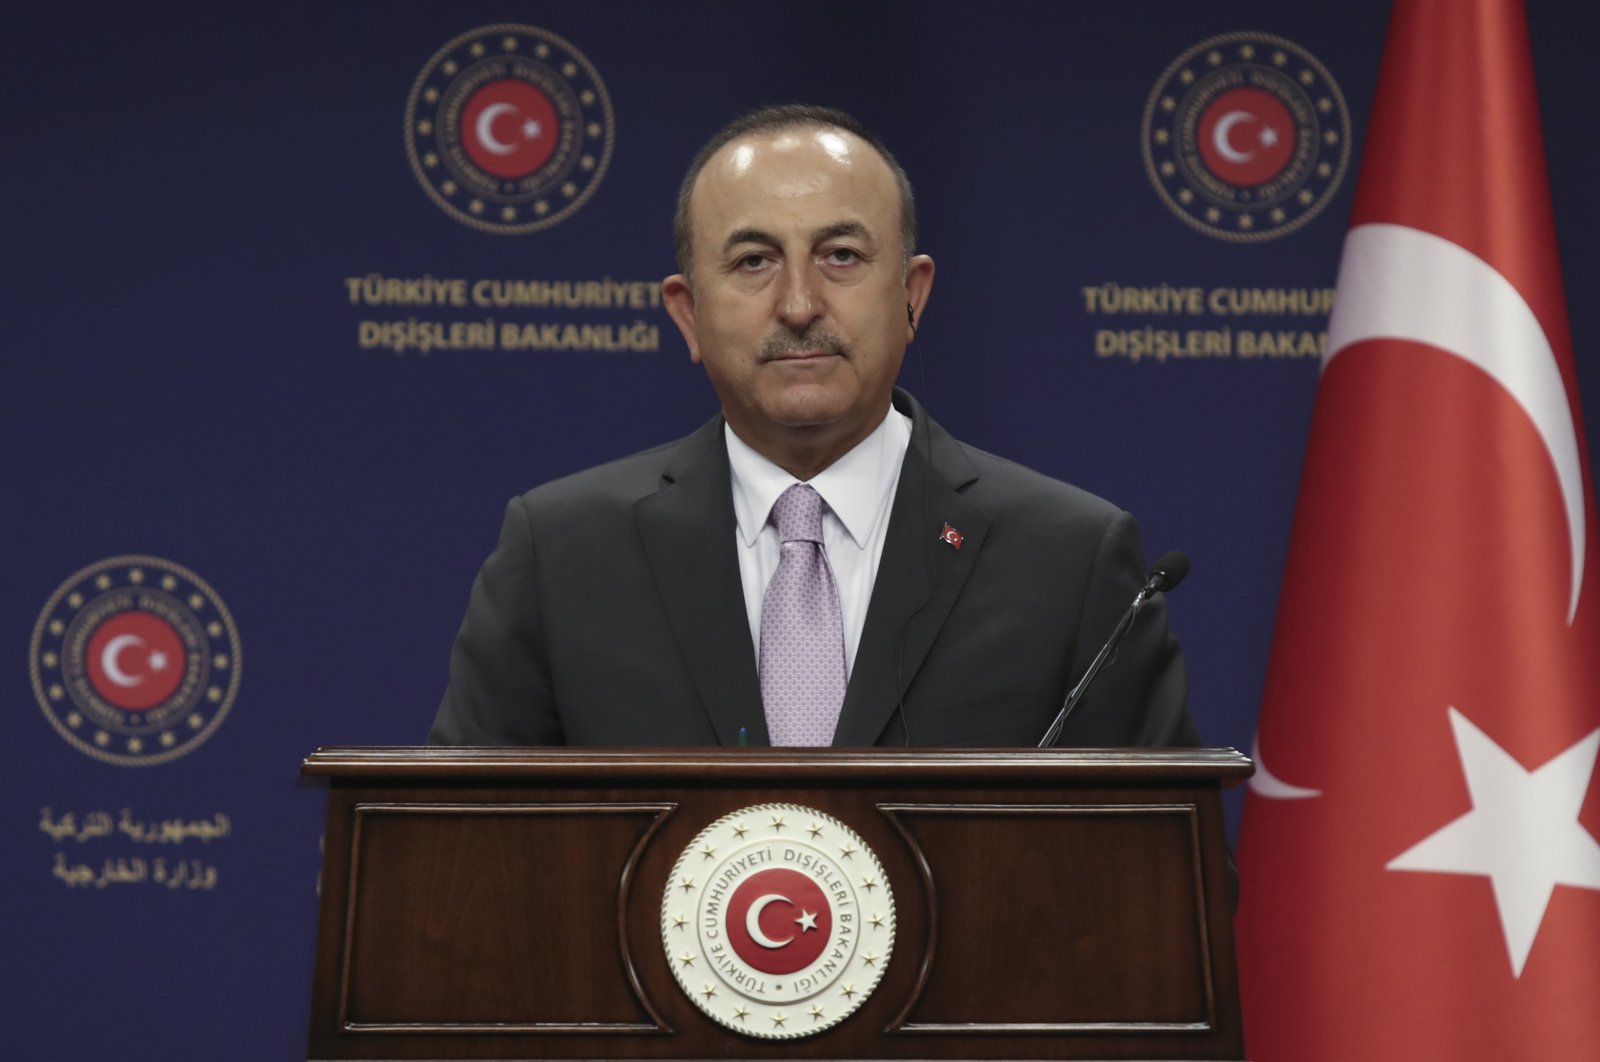 Turkey's Foreign Minister Mevlüt Çavuşoğlu speaks during a news conference with Jean Claude Gakosso, Minister of Foreign Affairs of the Republic of Congo, in Ankara, Sept. 8, 2020. (AP Photo)